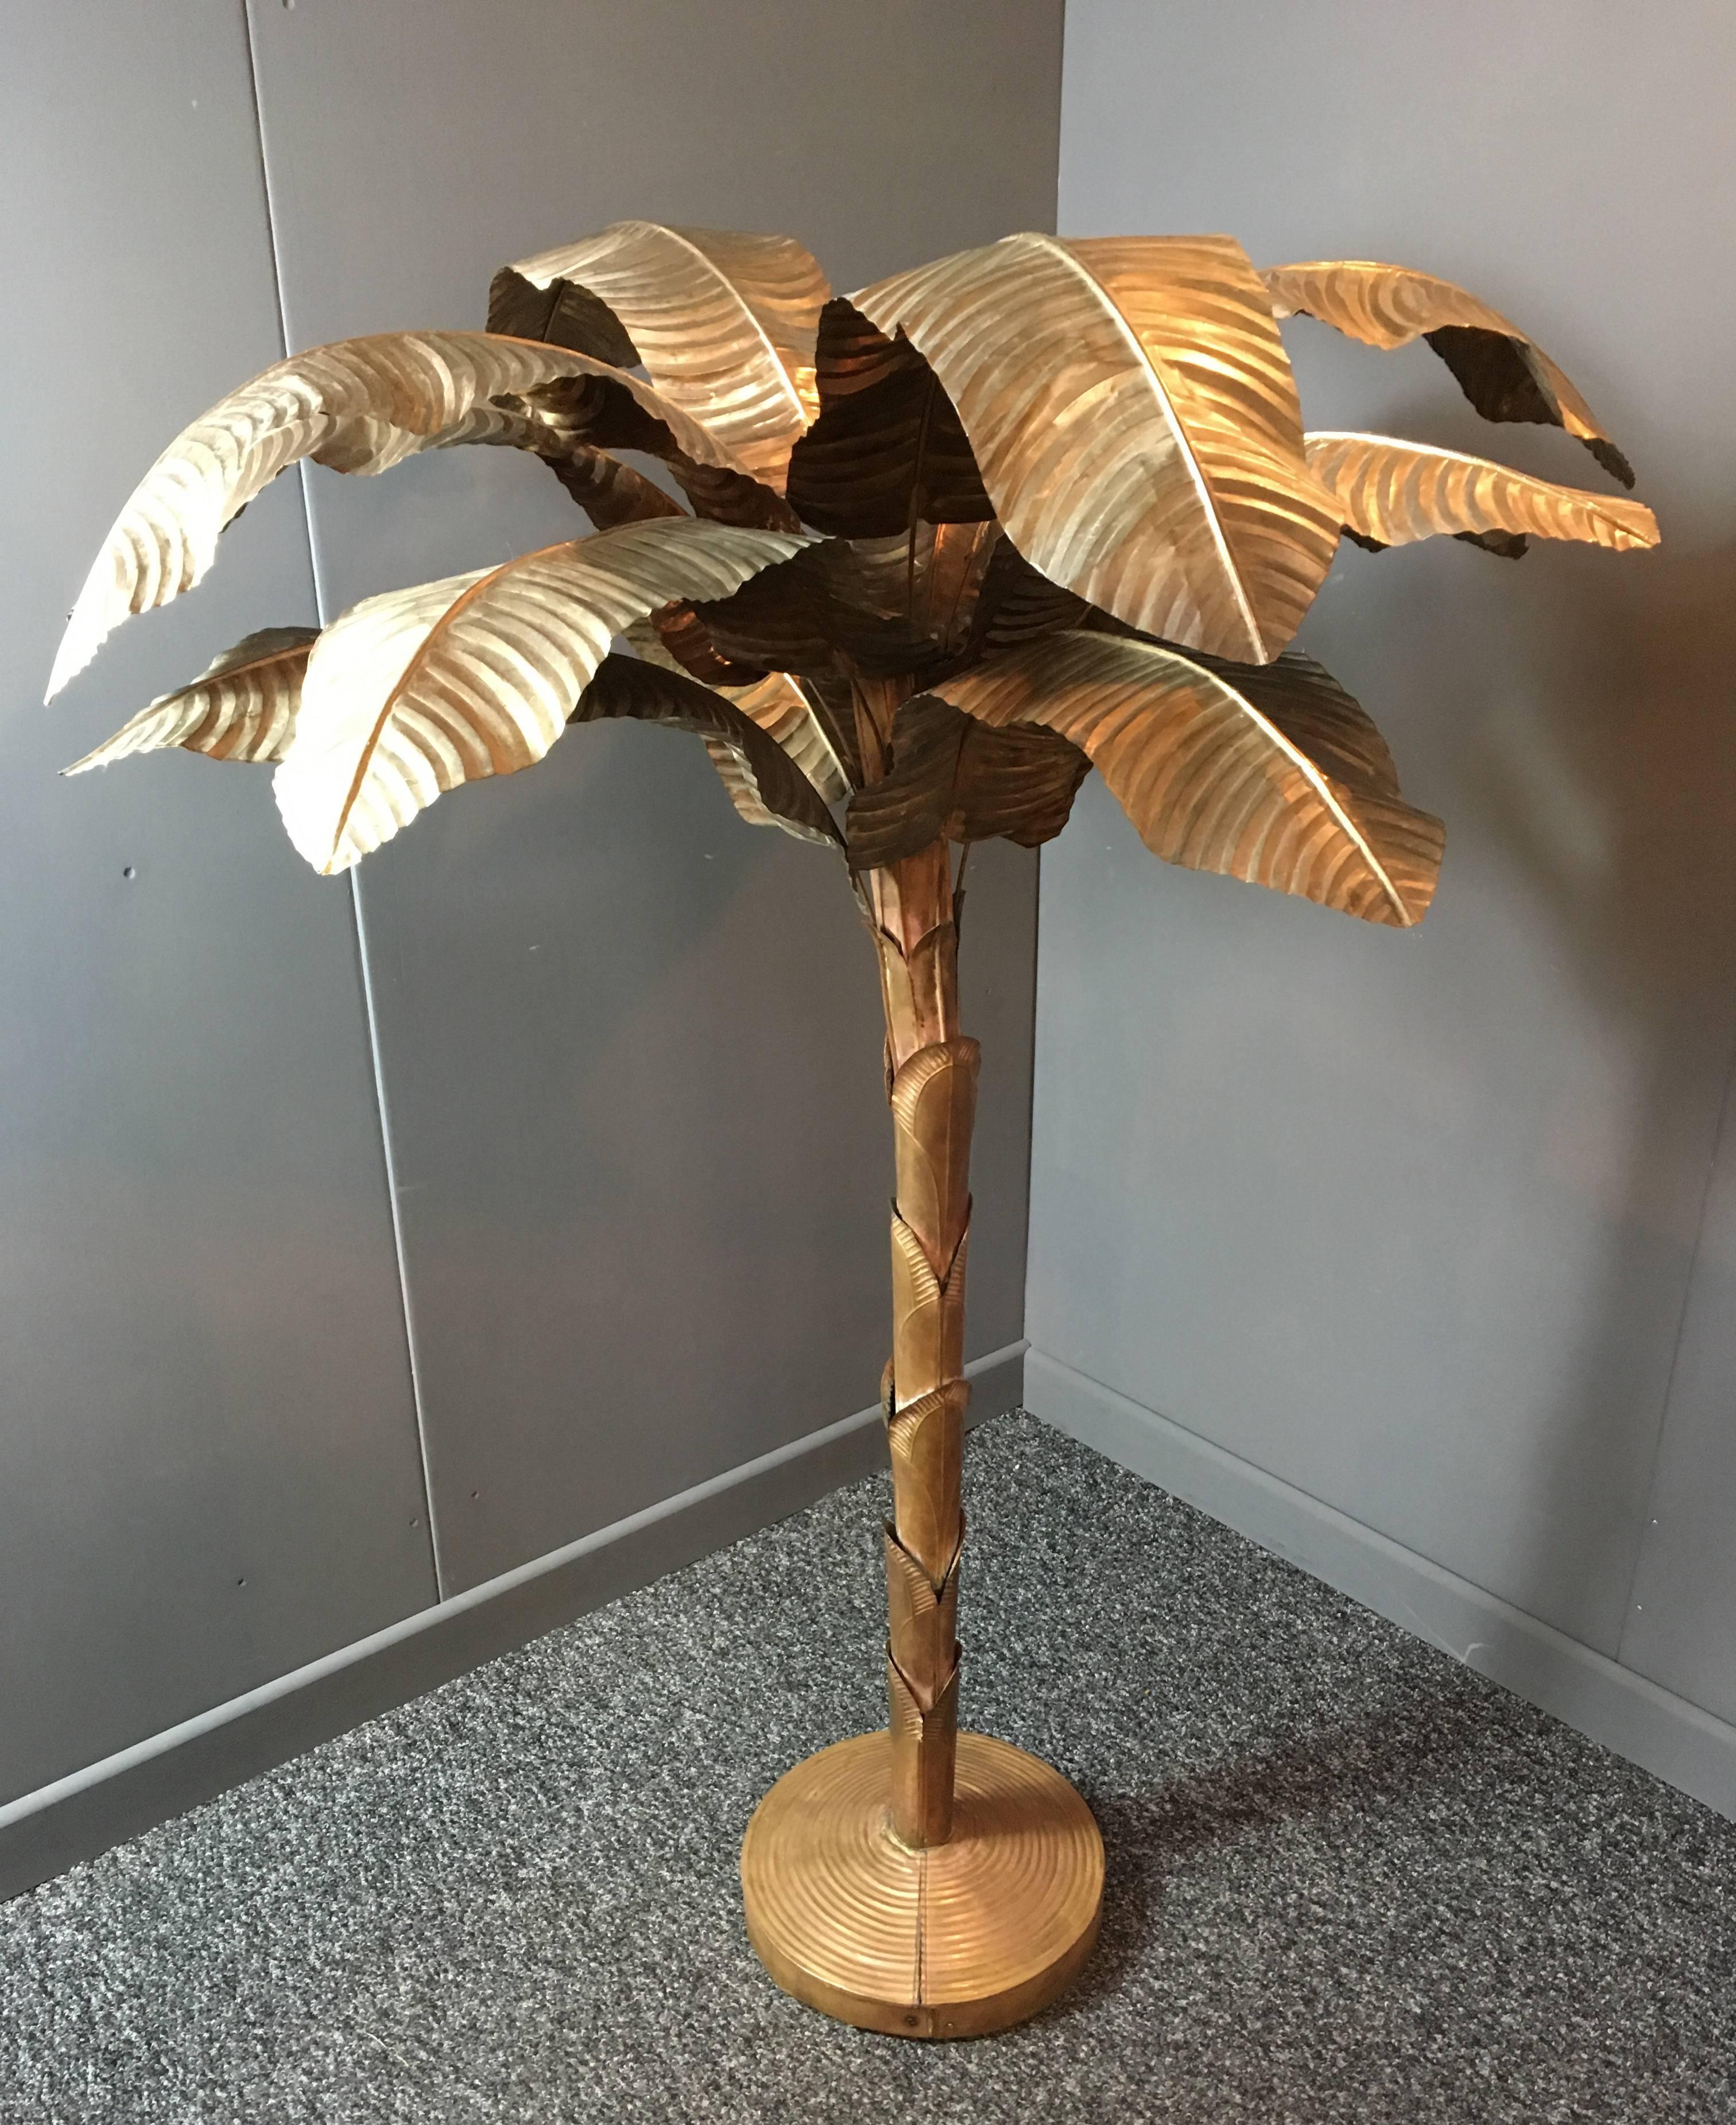 Huge brass and copper banana tree sculpture,

midcentury, circa 1960s.

France

Handcrafted leaves are fully removable and slot into the main stem of the tree

The stem has a natural slight bend to it as a banana tree would, this is a